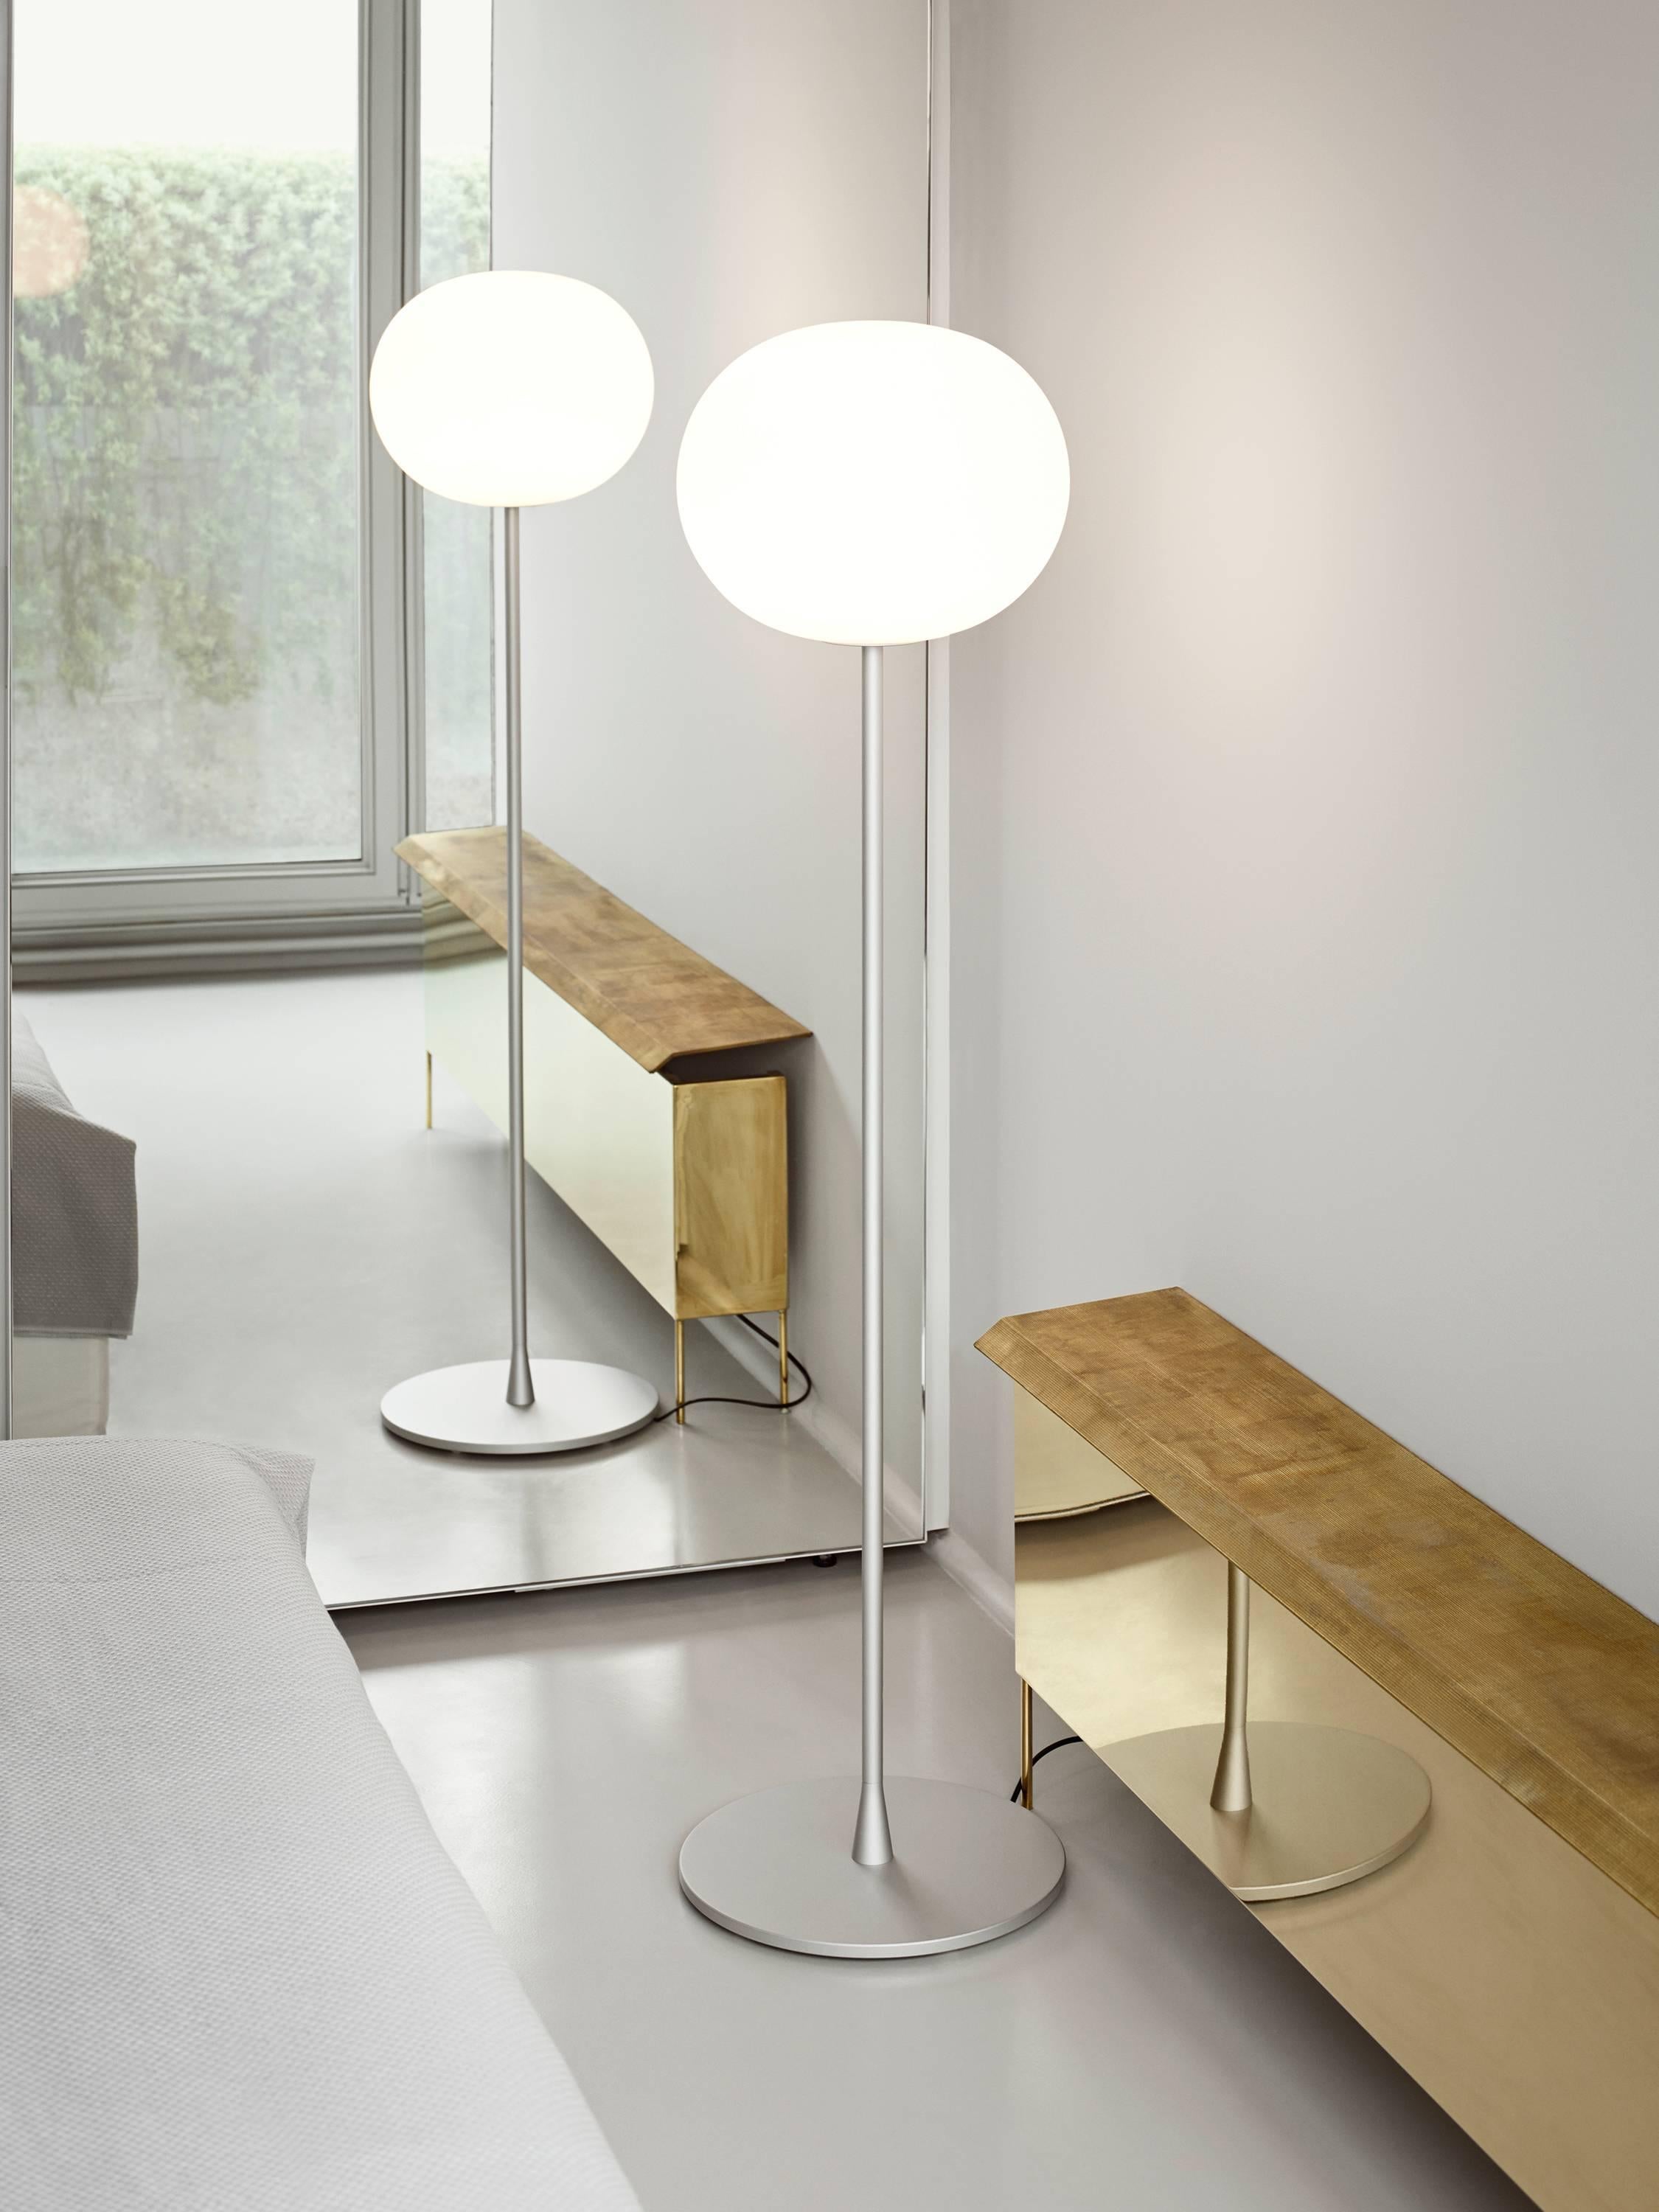 FLOS Glo-Ball F2 Halogen Floor Lamp by Jasper Morrison

Part of the popular Glo Ball Series, the Glo Ball-F was created in 1998 by artist Jasper Morrison to invoke the radiant calm of a full moon. This contemporary floor lamp fits naturally into any